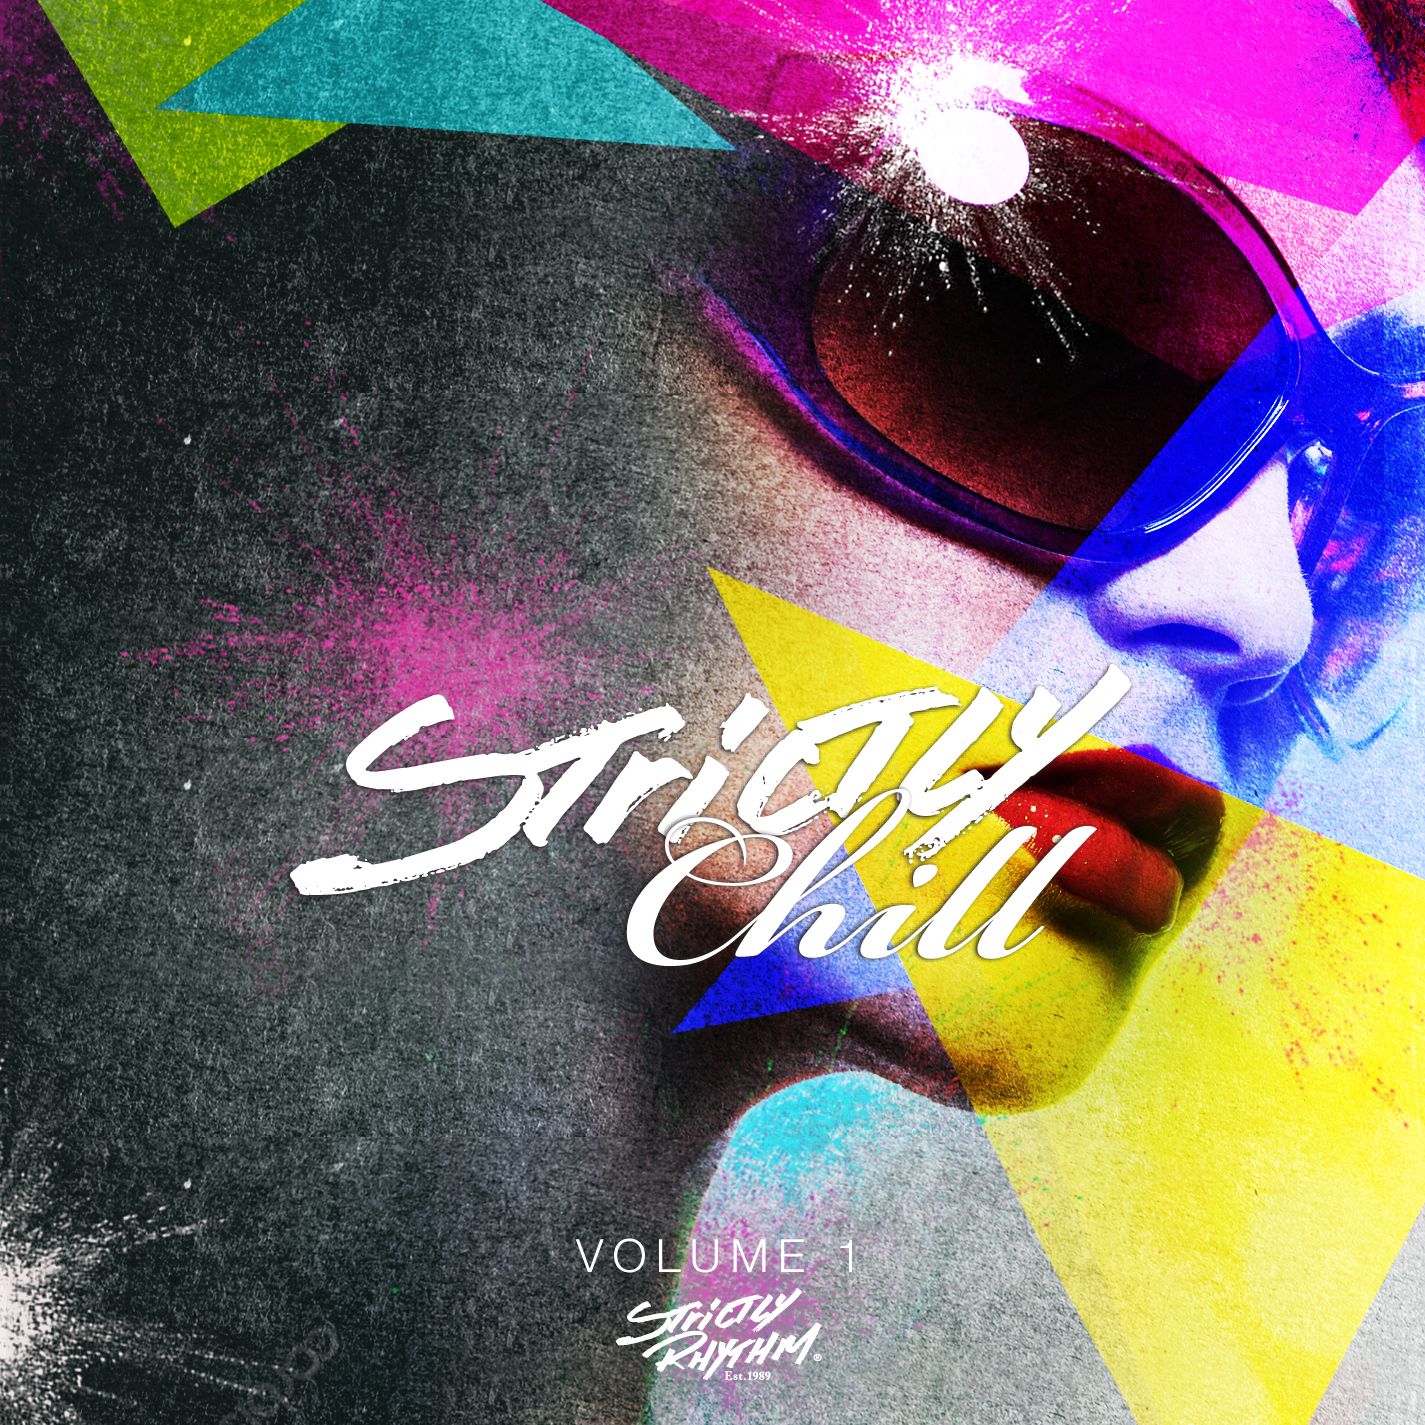 Strictly Chill Volume 1 (DJ Edition-Unmixed)